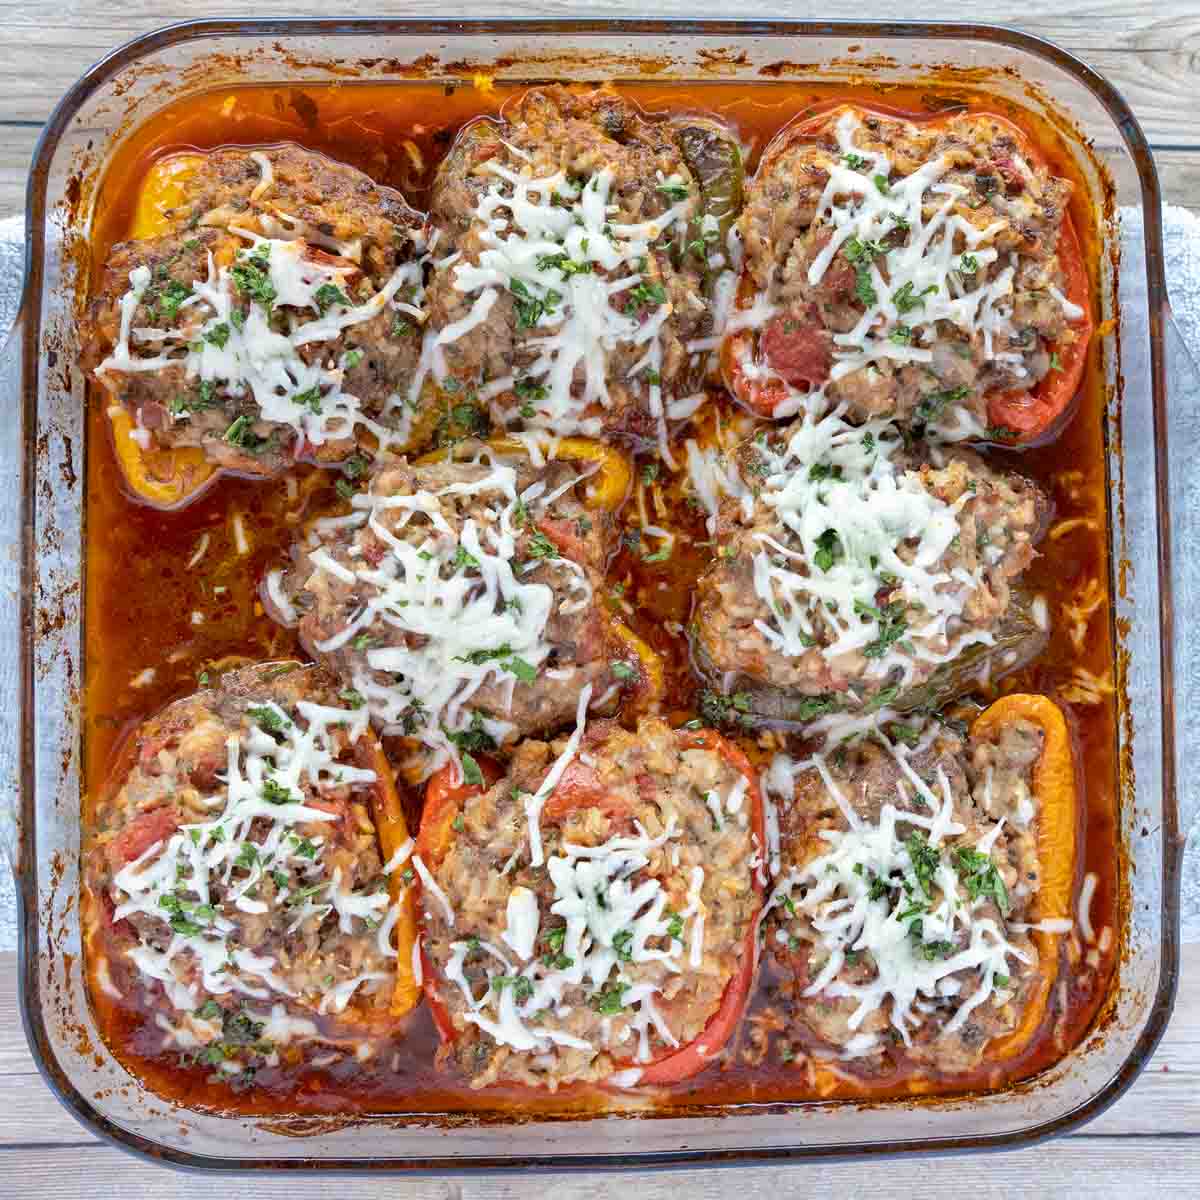 Baked stuffed peppers with sauce in a glass baking dish.